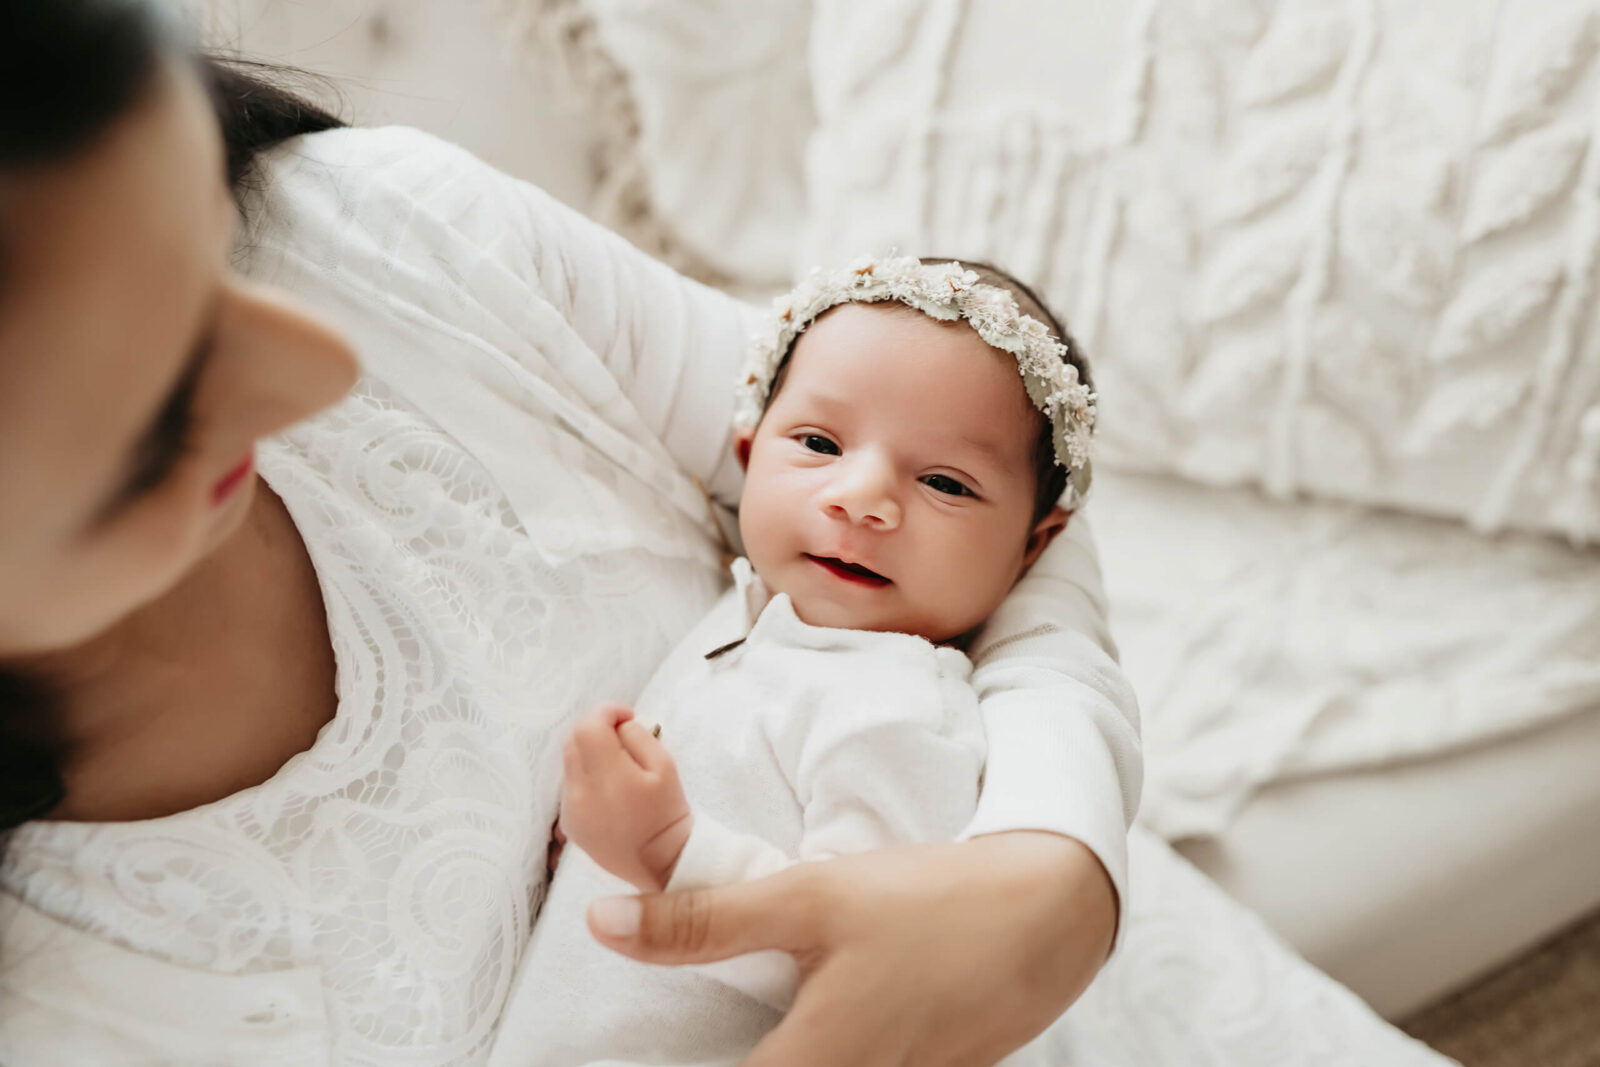 Mom in soft focus holding her newborn daughter during a photo shoot